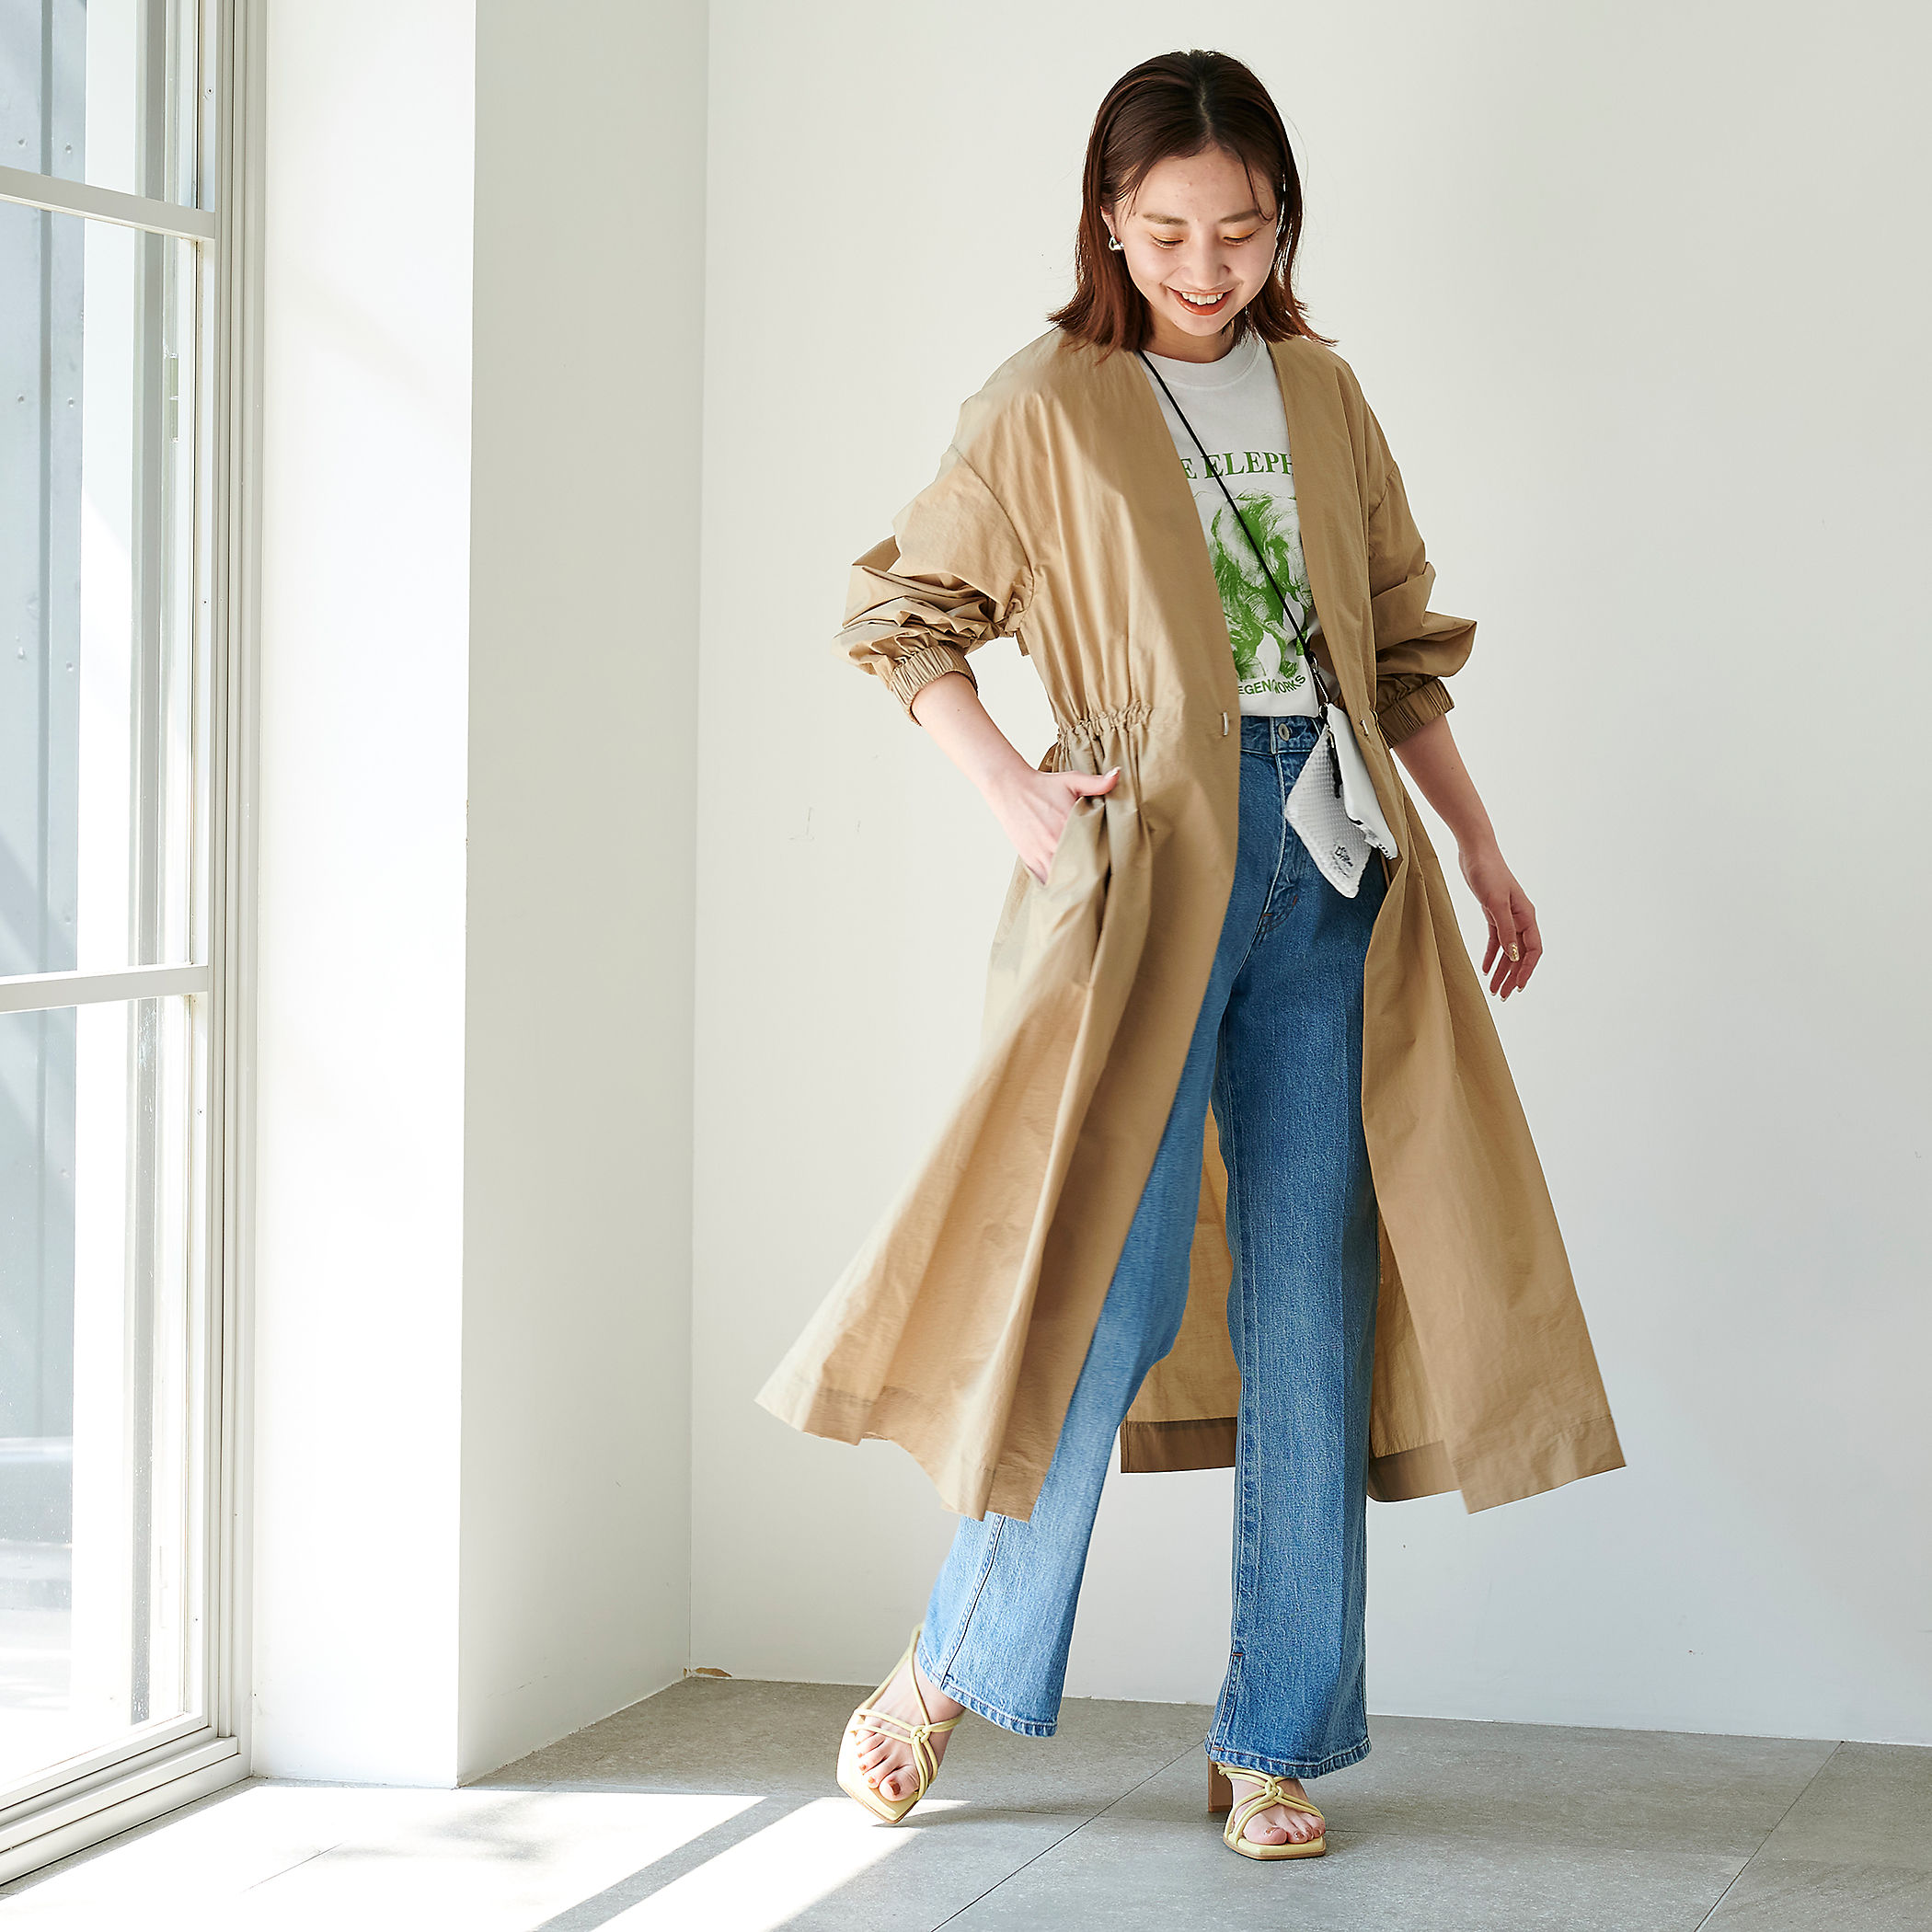 UNITED ARROWS green label relaxing
【矢野未希子さん着用】 ギャザー ドロスト ガウン コート
￥16,500